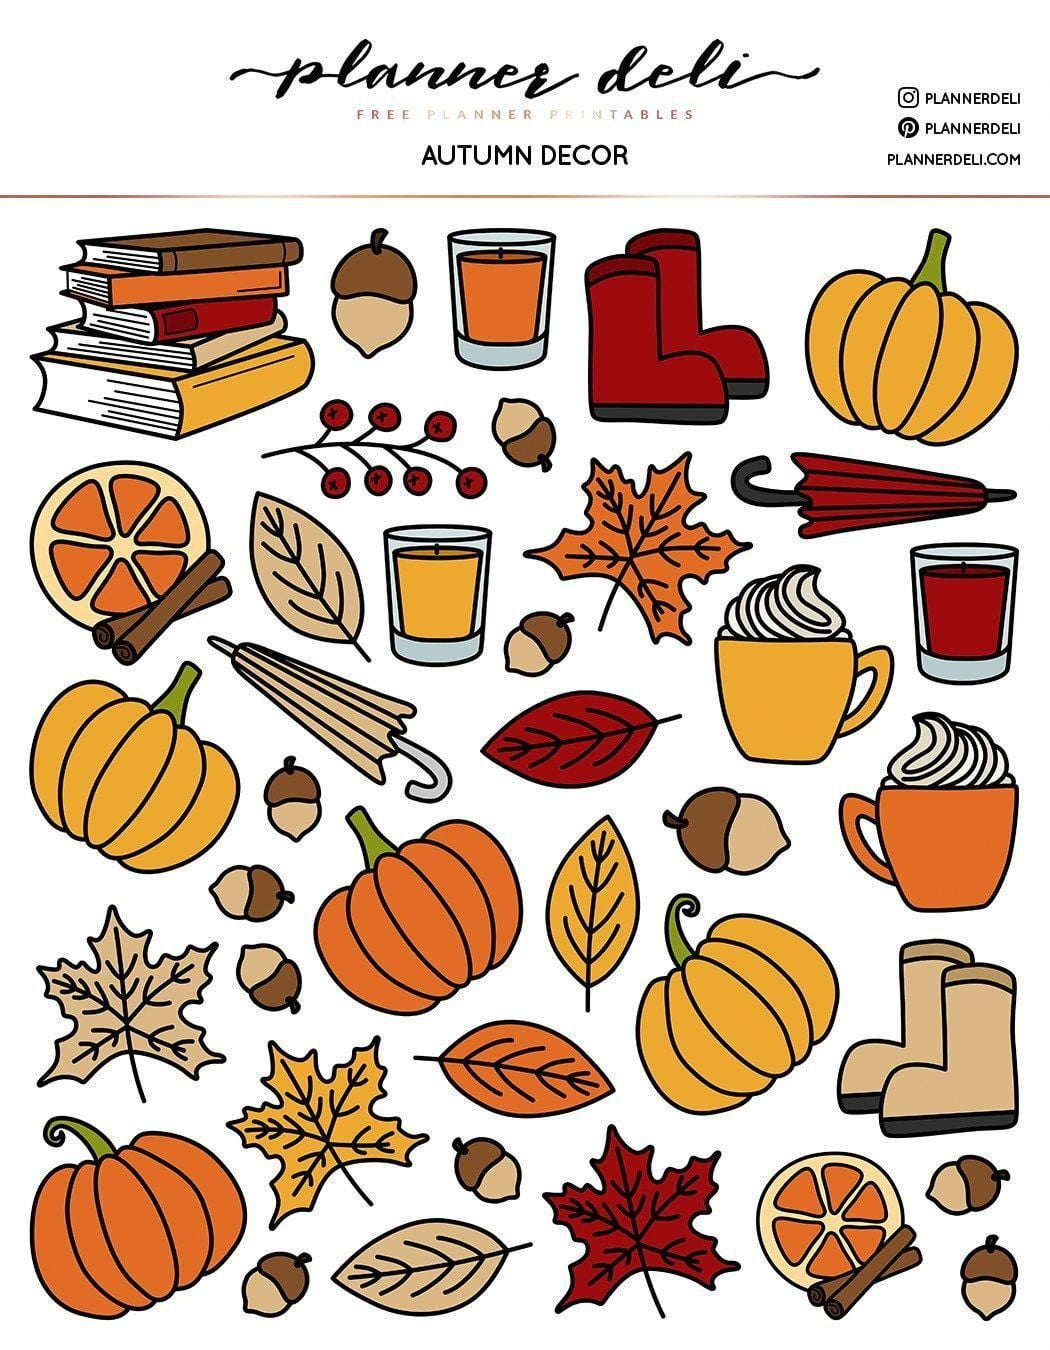 New Pictures Printable Stickers Autumn Popular One Of Many many Joys With The O Bullet Journal Stickers Bullet Journal Ideas Pages Bullet Journal Inspiration